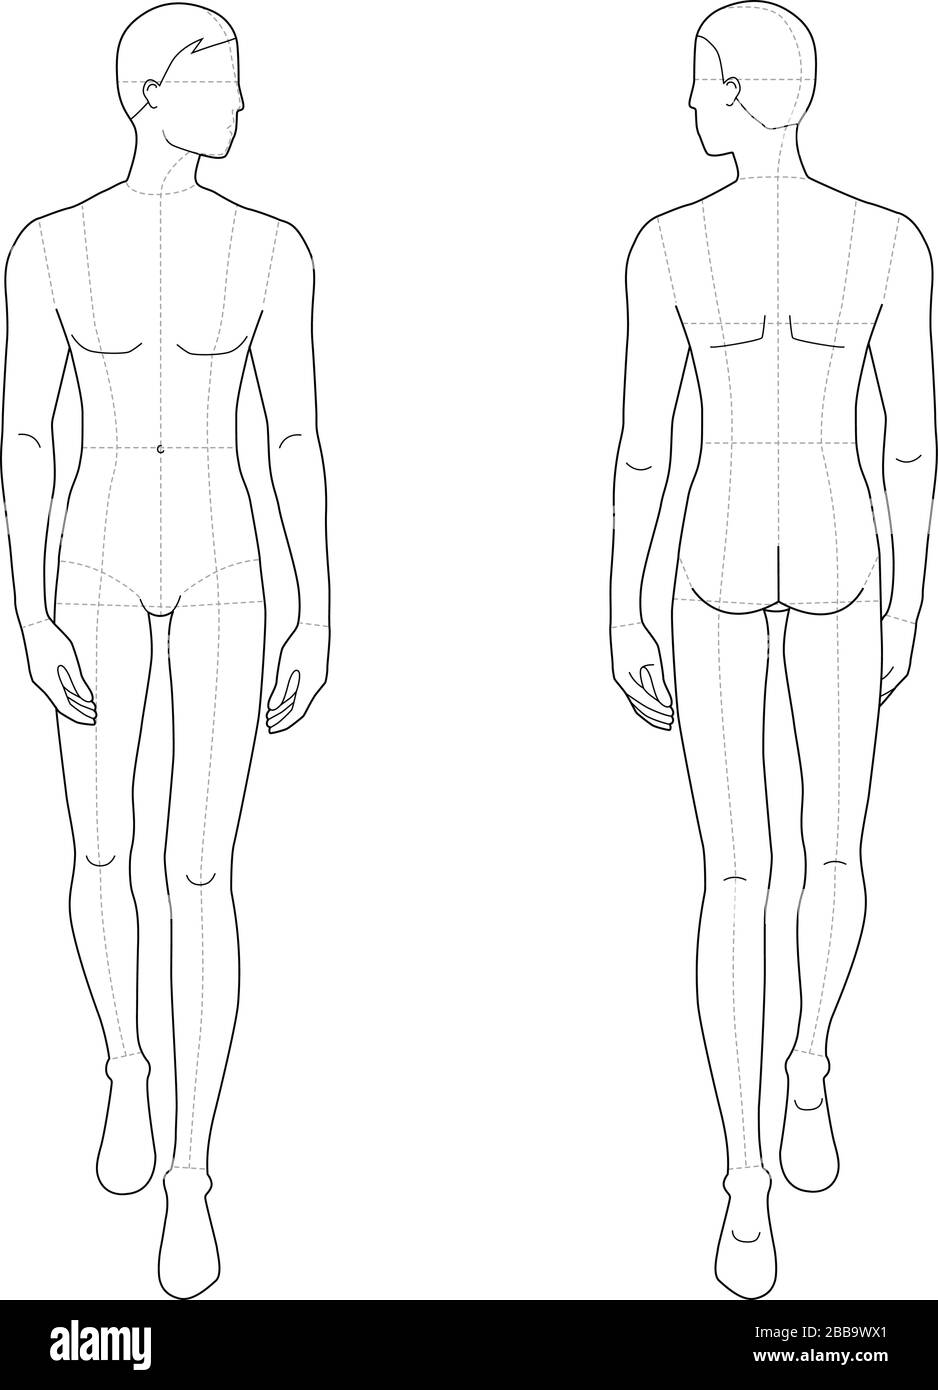 Male Body Outline Template